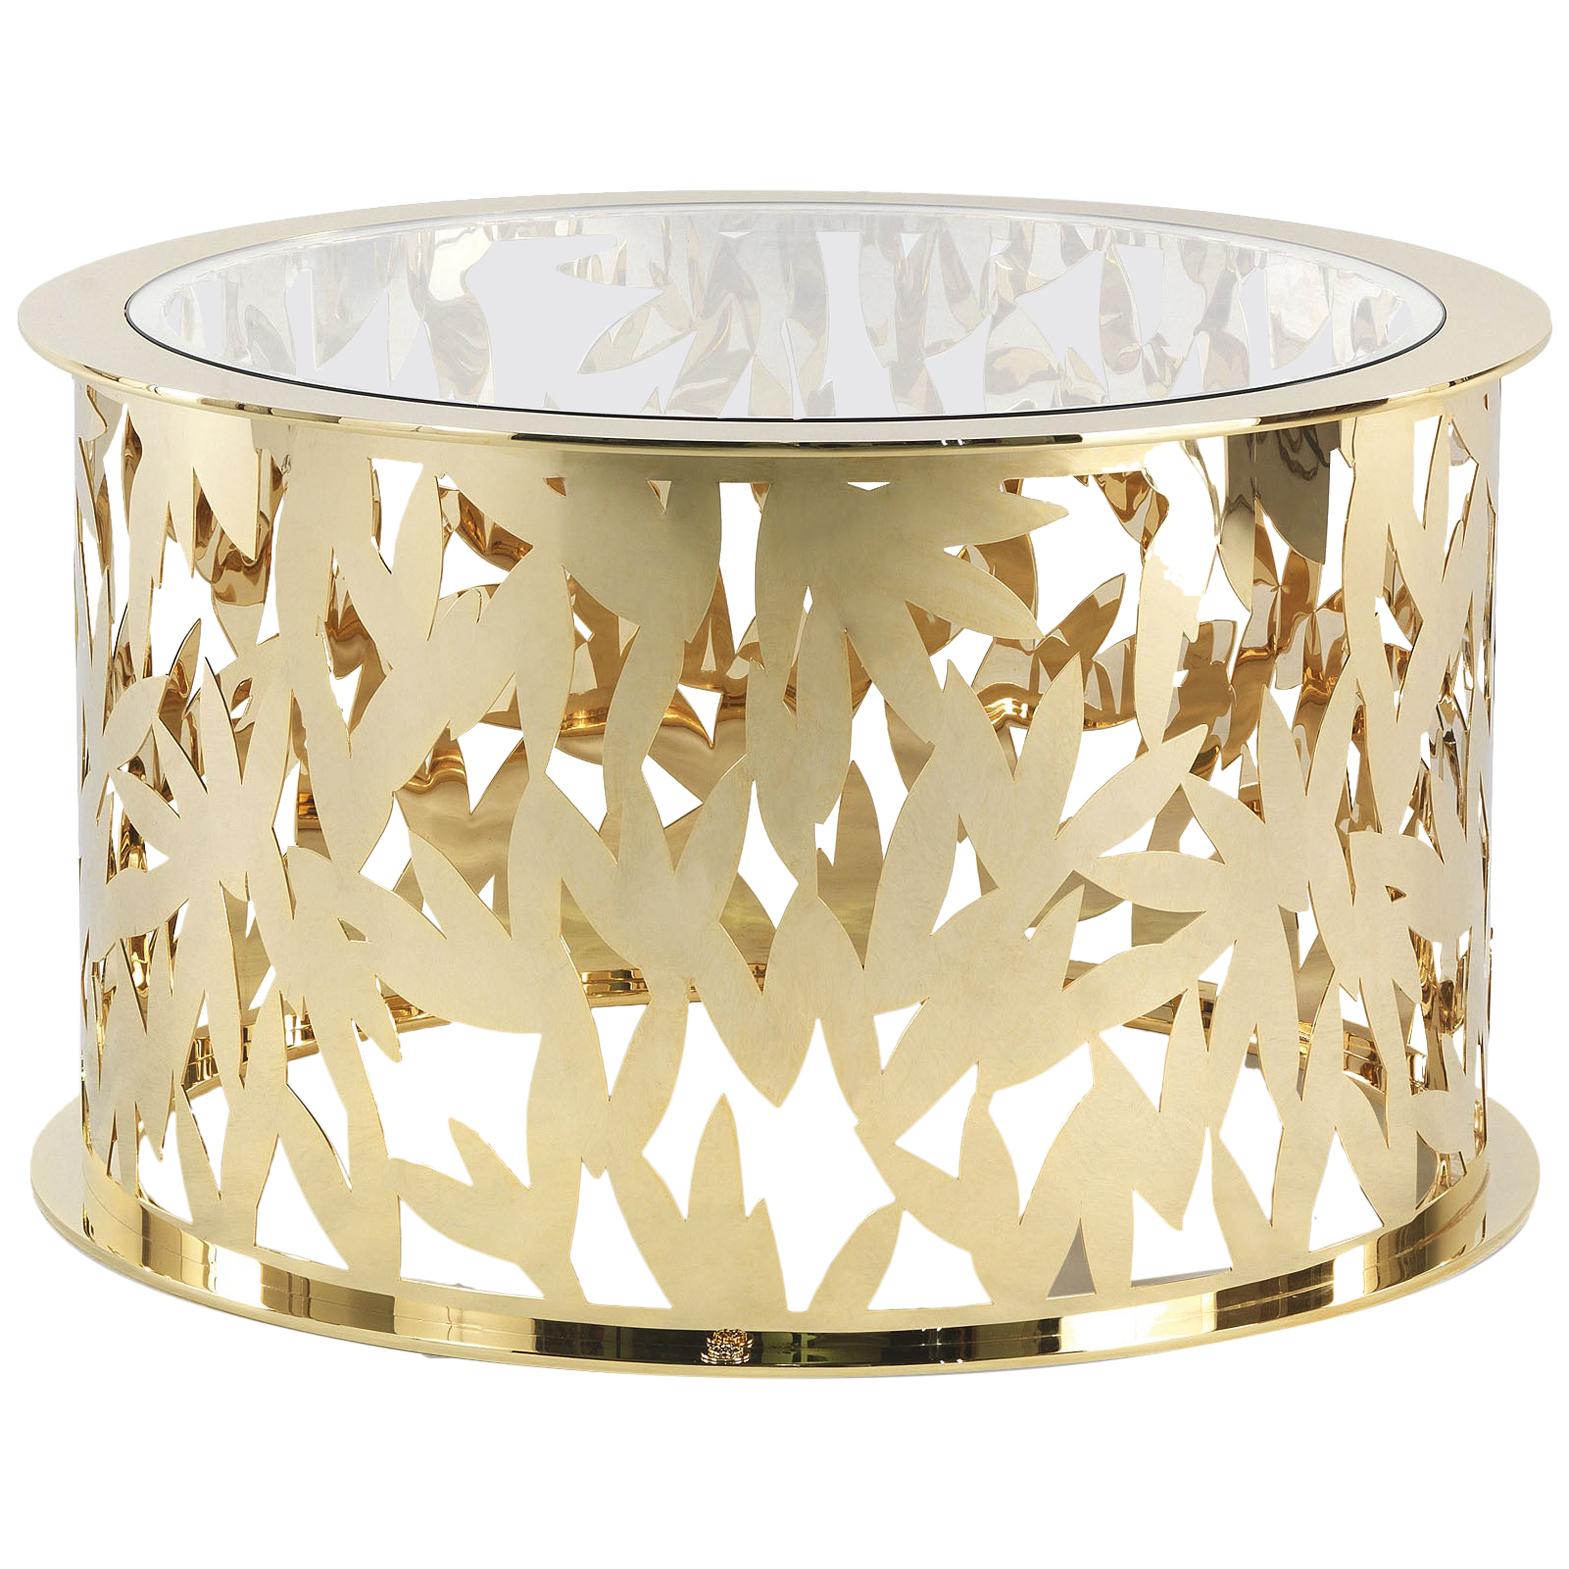 21st Century Lace Central Table in Metal by Roberto Cavalli Home Interiors 